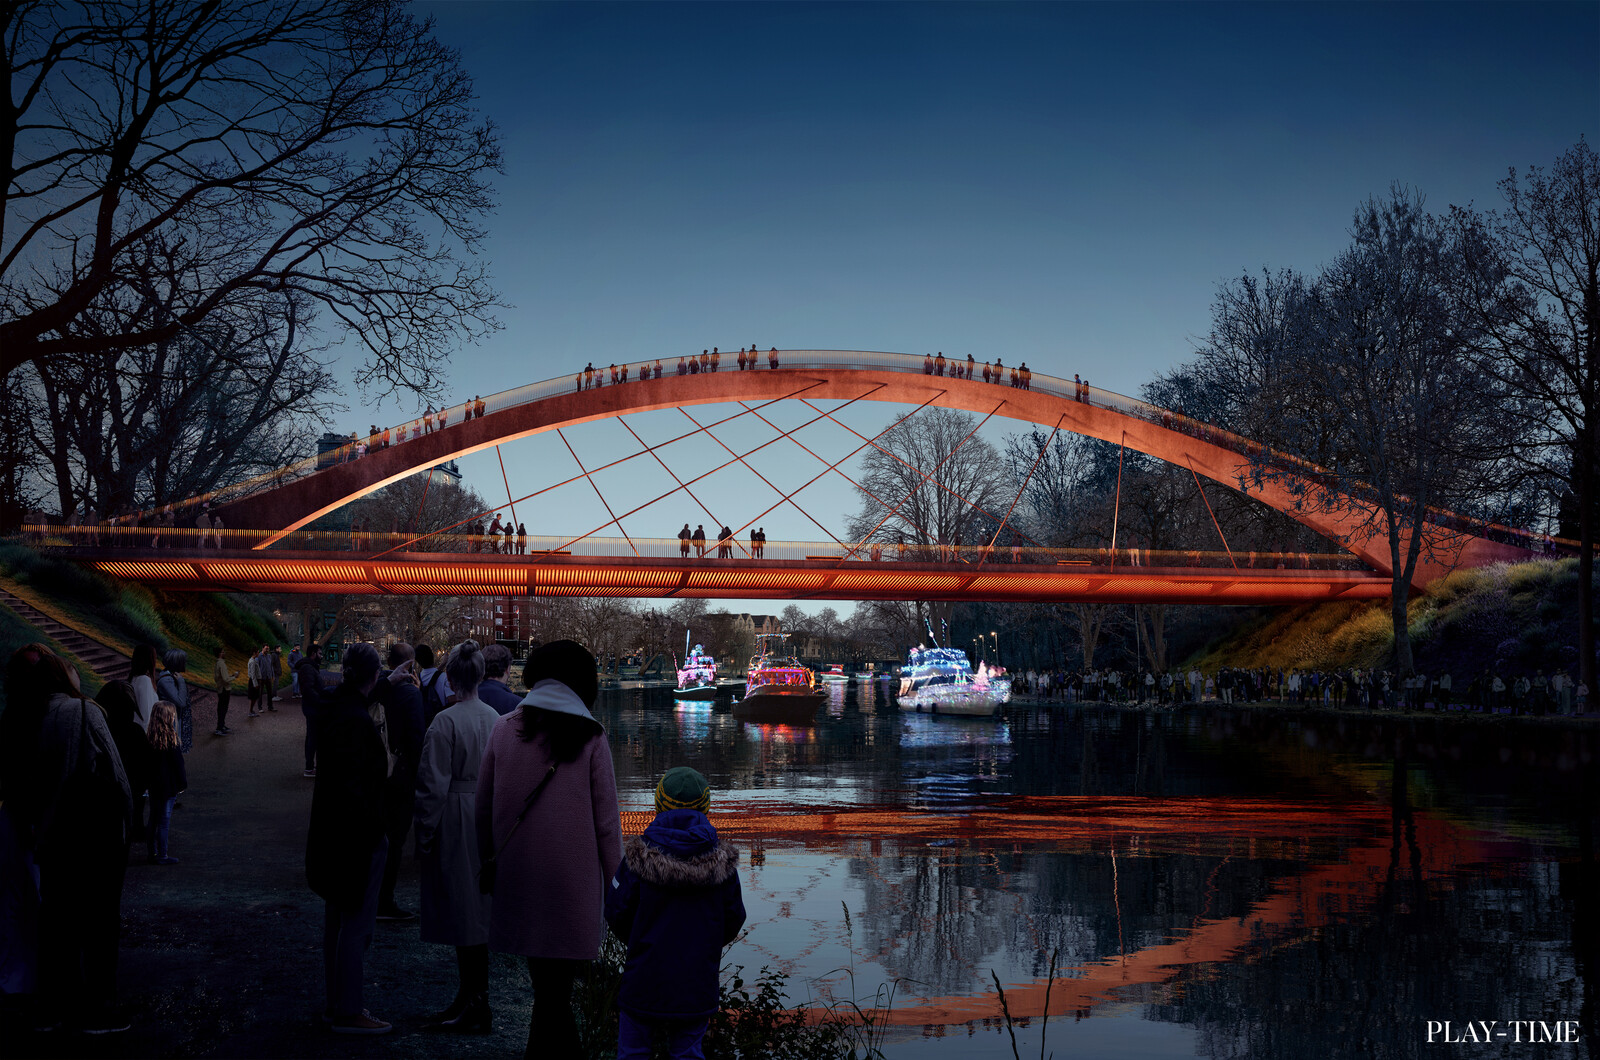 New bridge over Angelholm River designed by ENTROPIC. Images by PLAY-TIME Barcelona